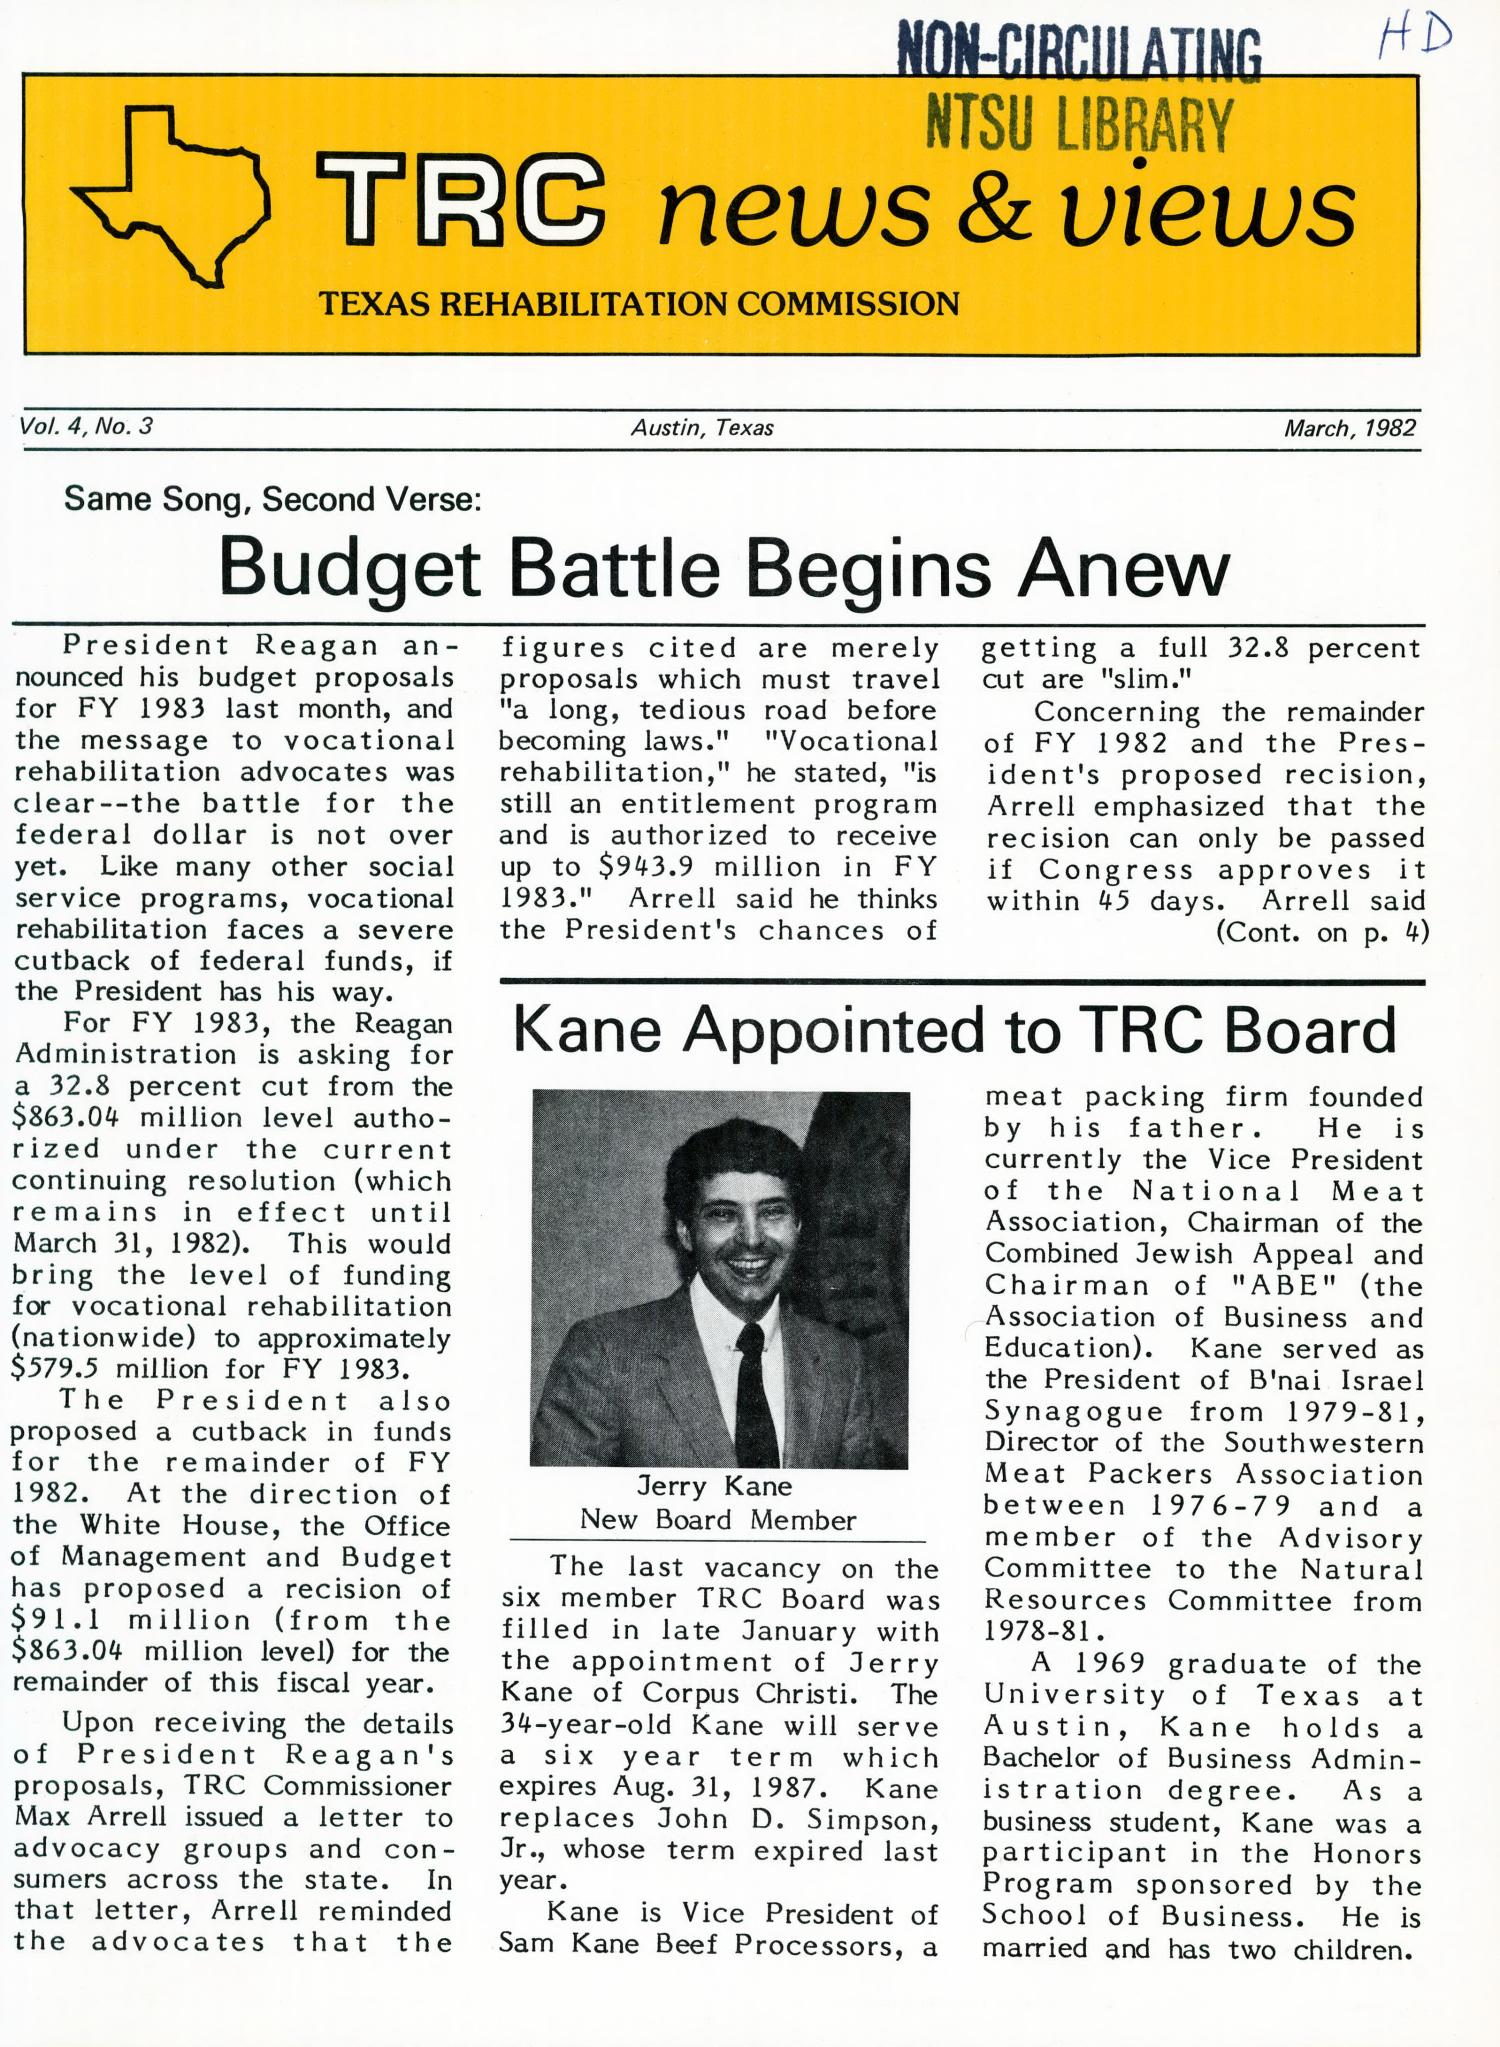 TRC News & Views, Volume 4, Number 3, March 1982
                                                
                                                    FRONT COVER
                                                